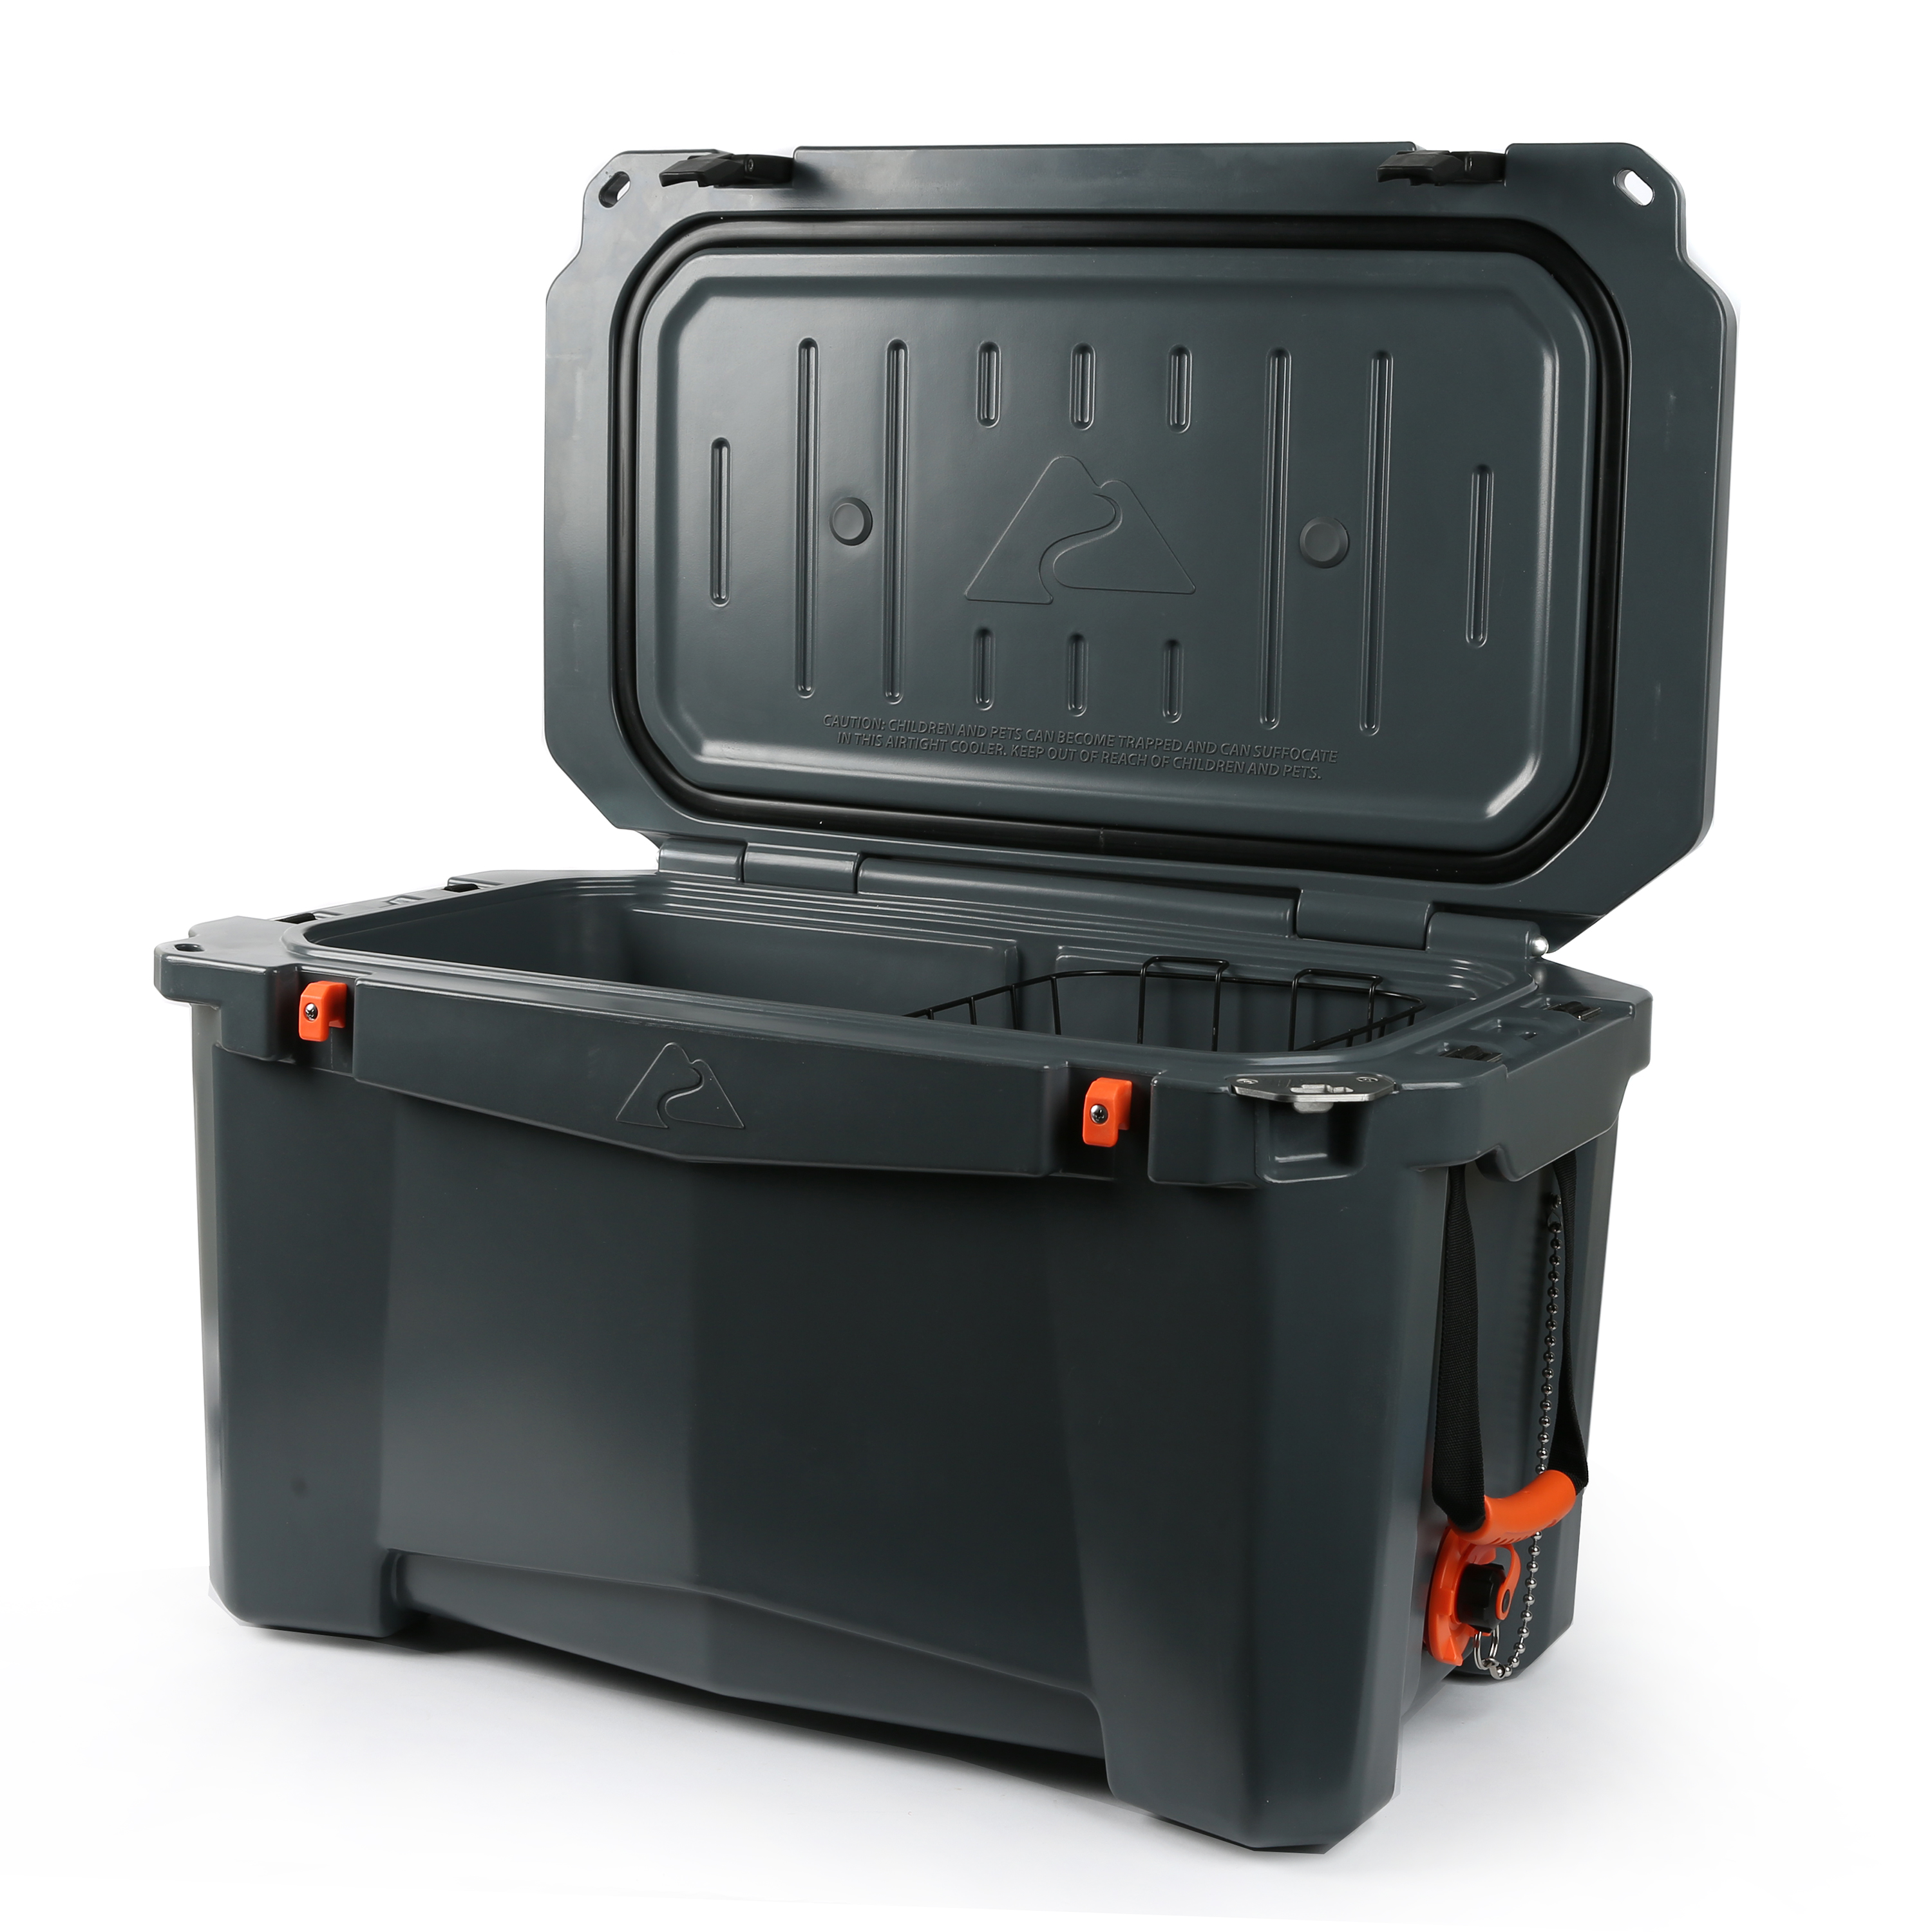 Ozark Trail 52 Quart High Performance Hard Sided Chest Cooler, Gray - image 4 of 11